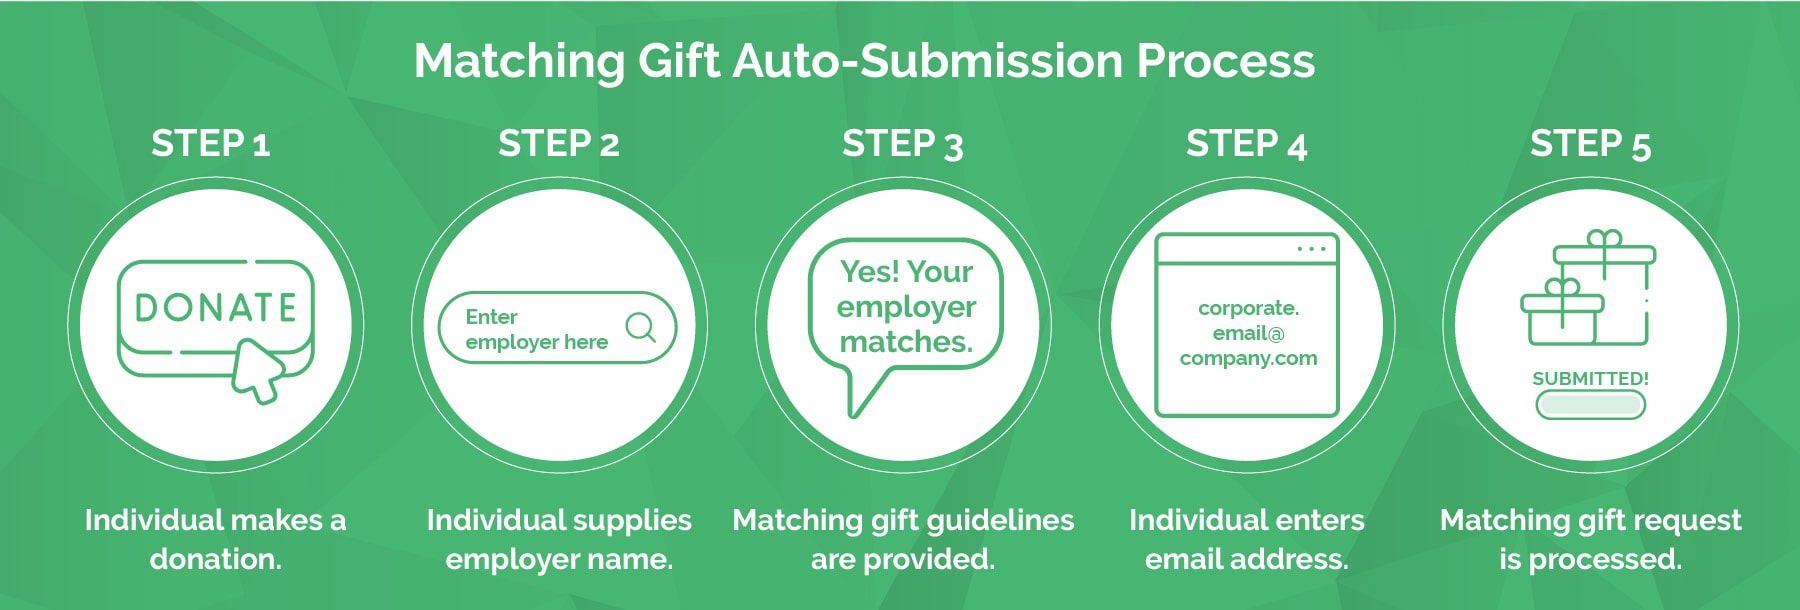 Matching Gift Databases: The Ultimate Q&A Guide for Nonprofits